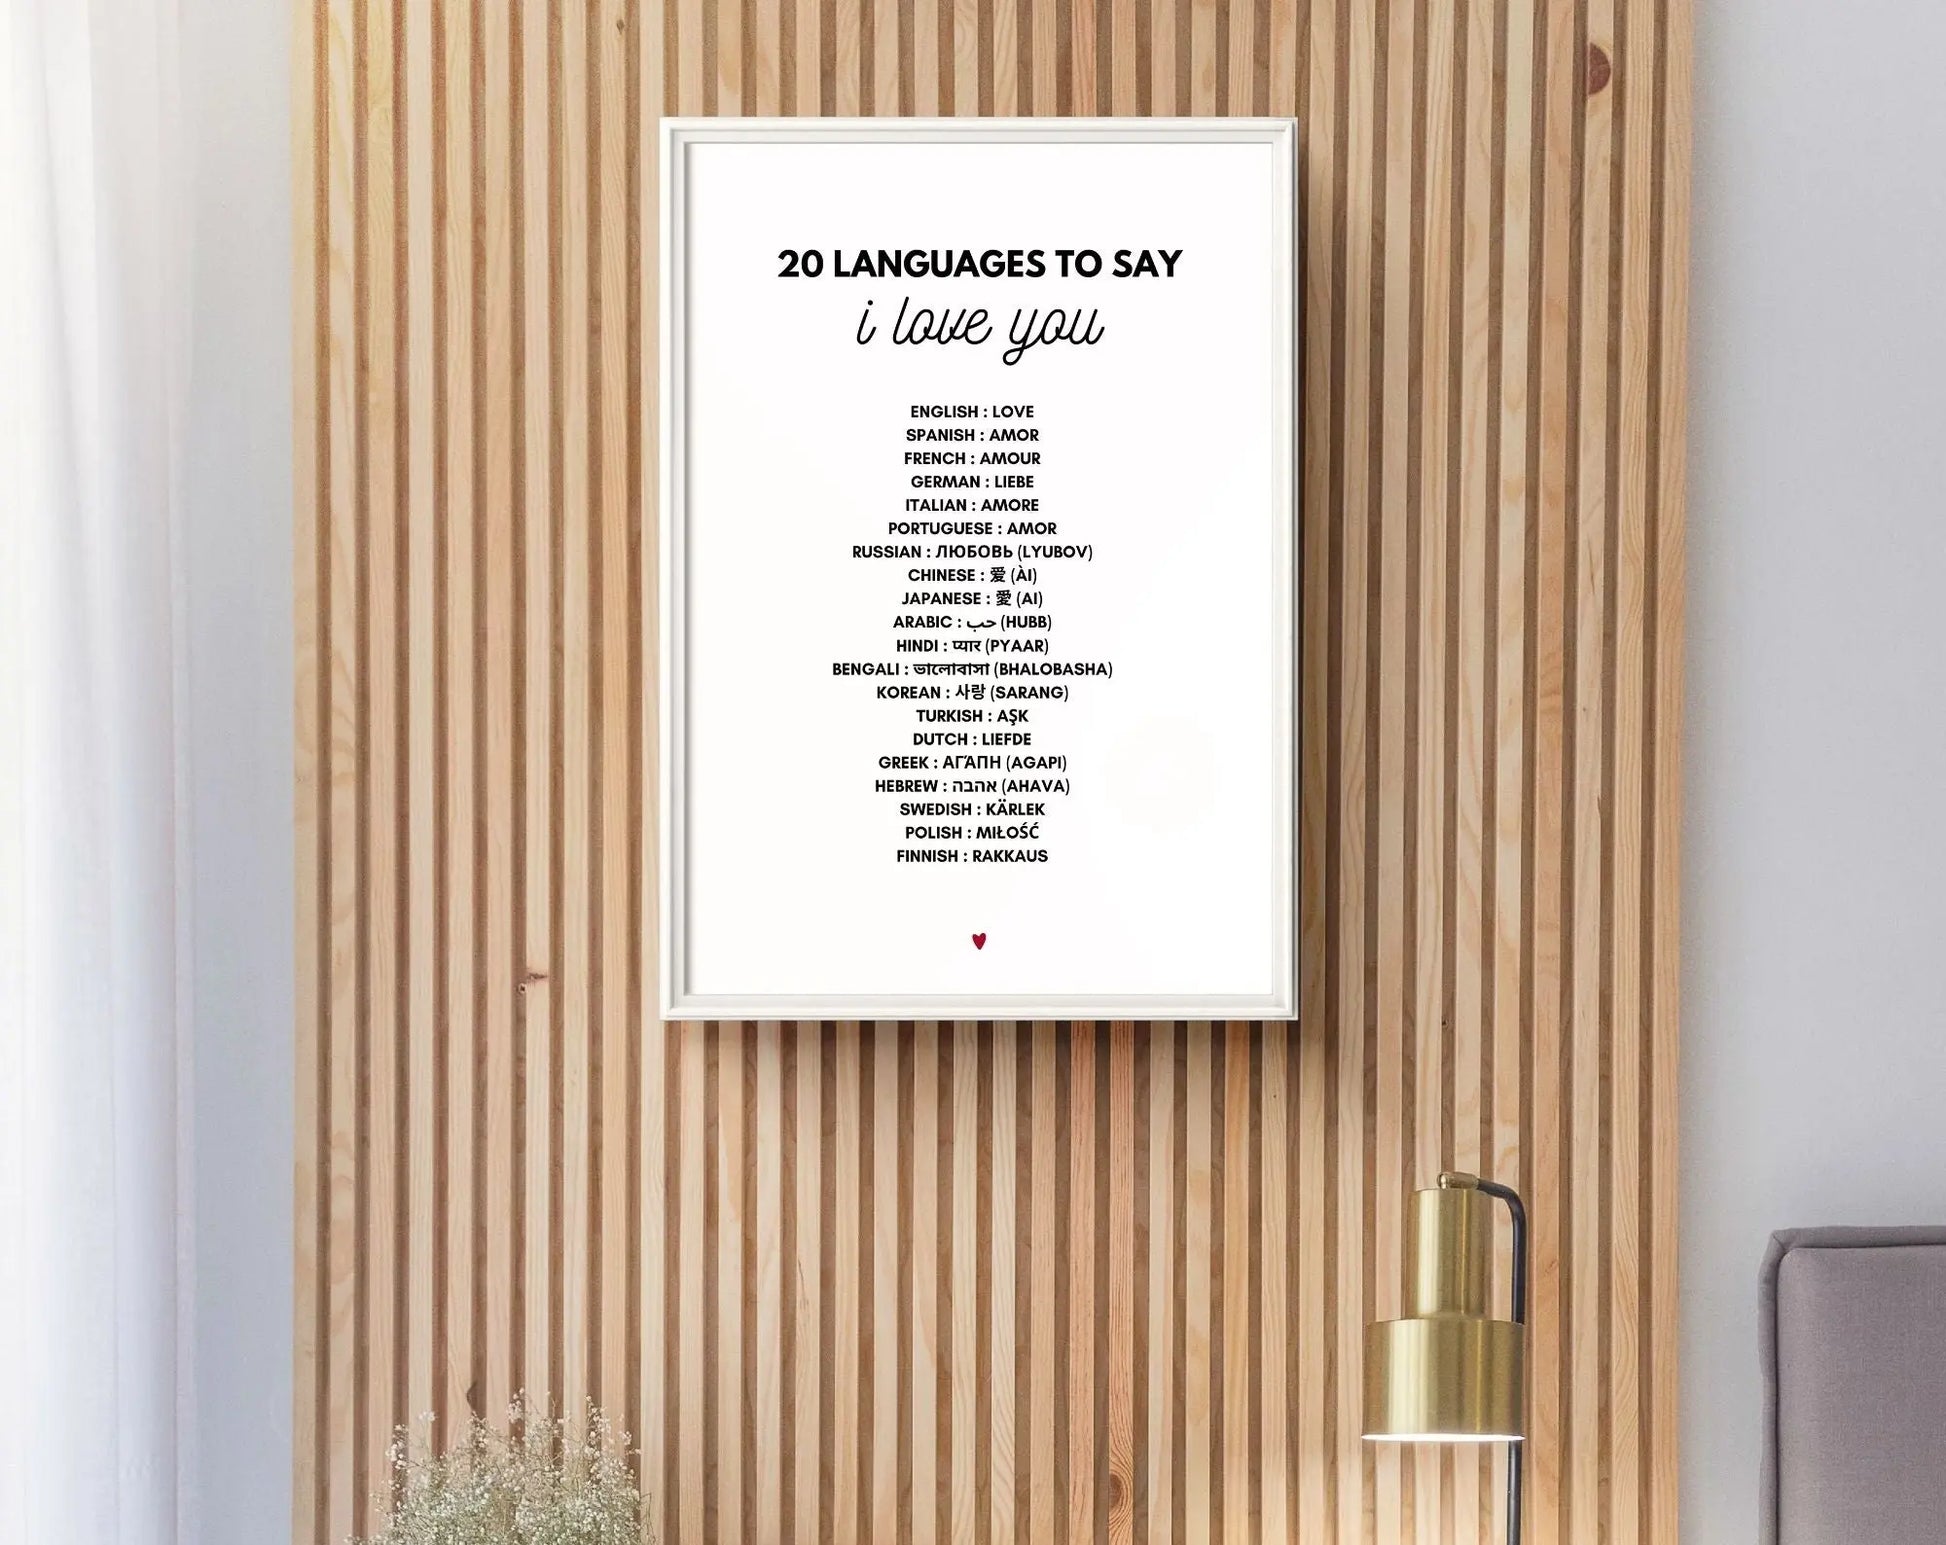 How to say "I love you" in 20 languages Love poster - Wall art -  Trendy prints - Valentine's Day gift - Digital Printable poster FLTMfrance FLTMfrance